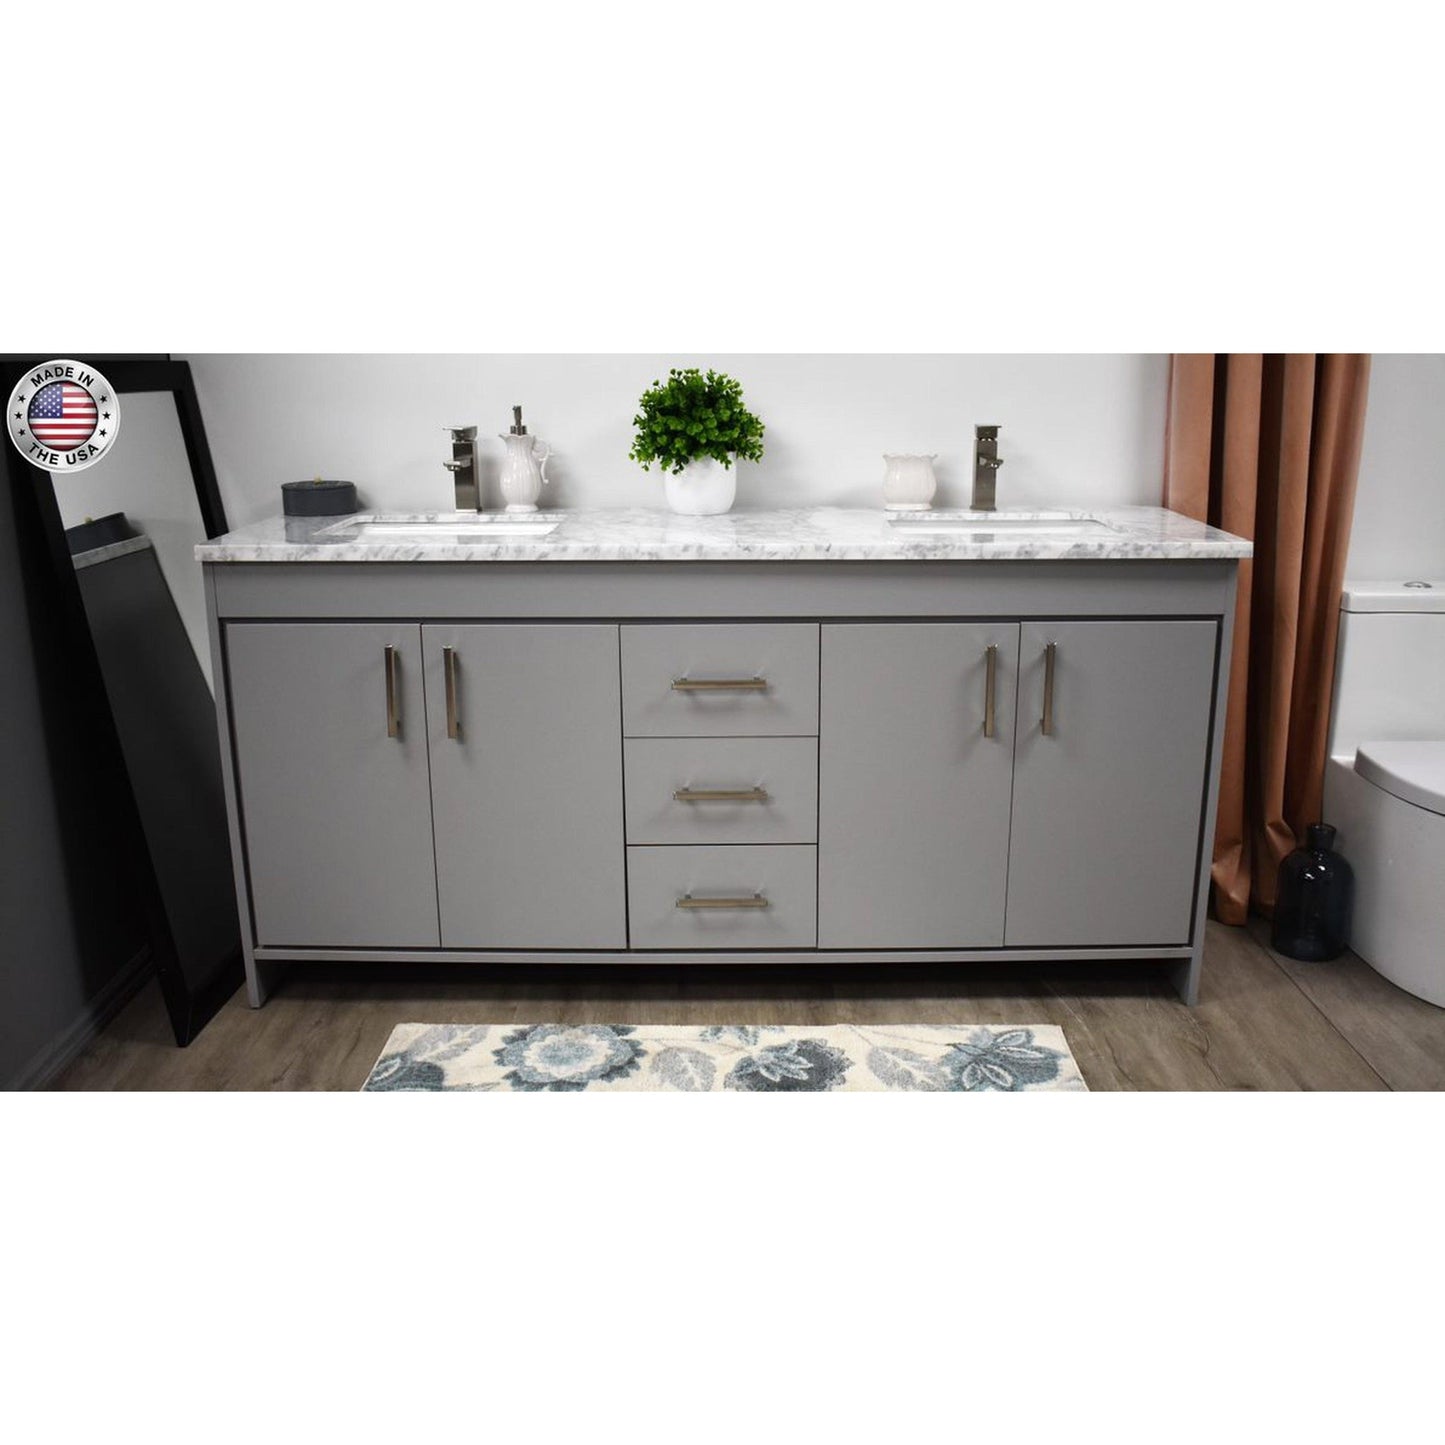 Volpa USA Capri 72" x 22" Gray Freestanding Modern Bathroom Vanity With Undermount Double Sink And Carrara Marble Top With Brushed Nickel Edge Handles